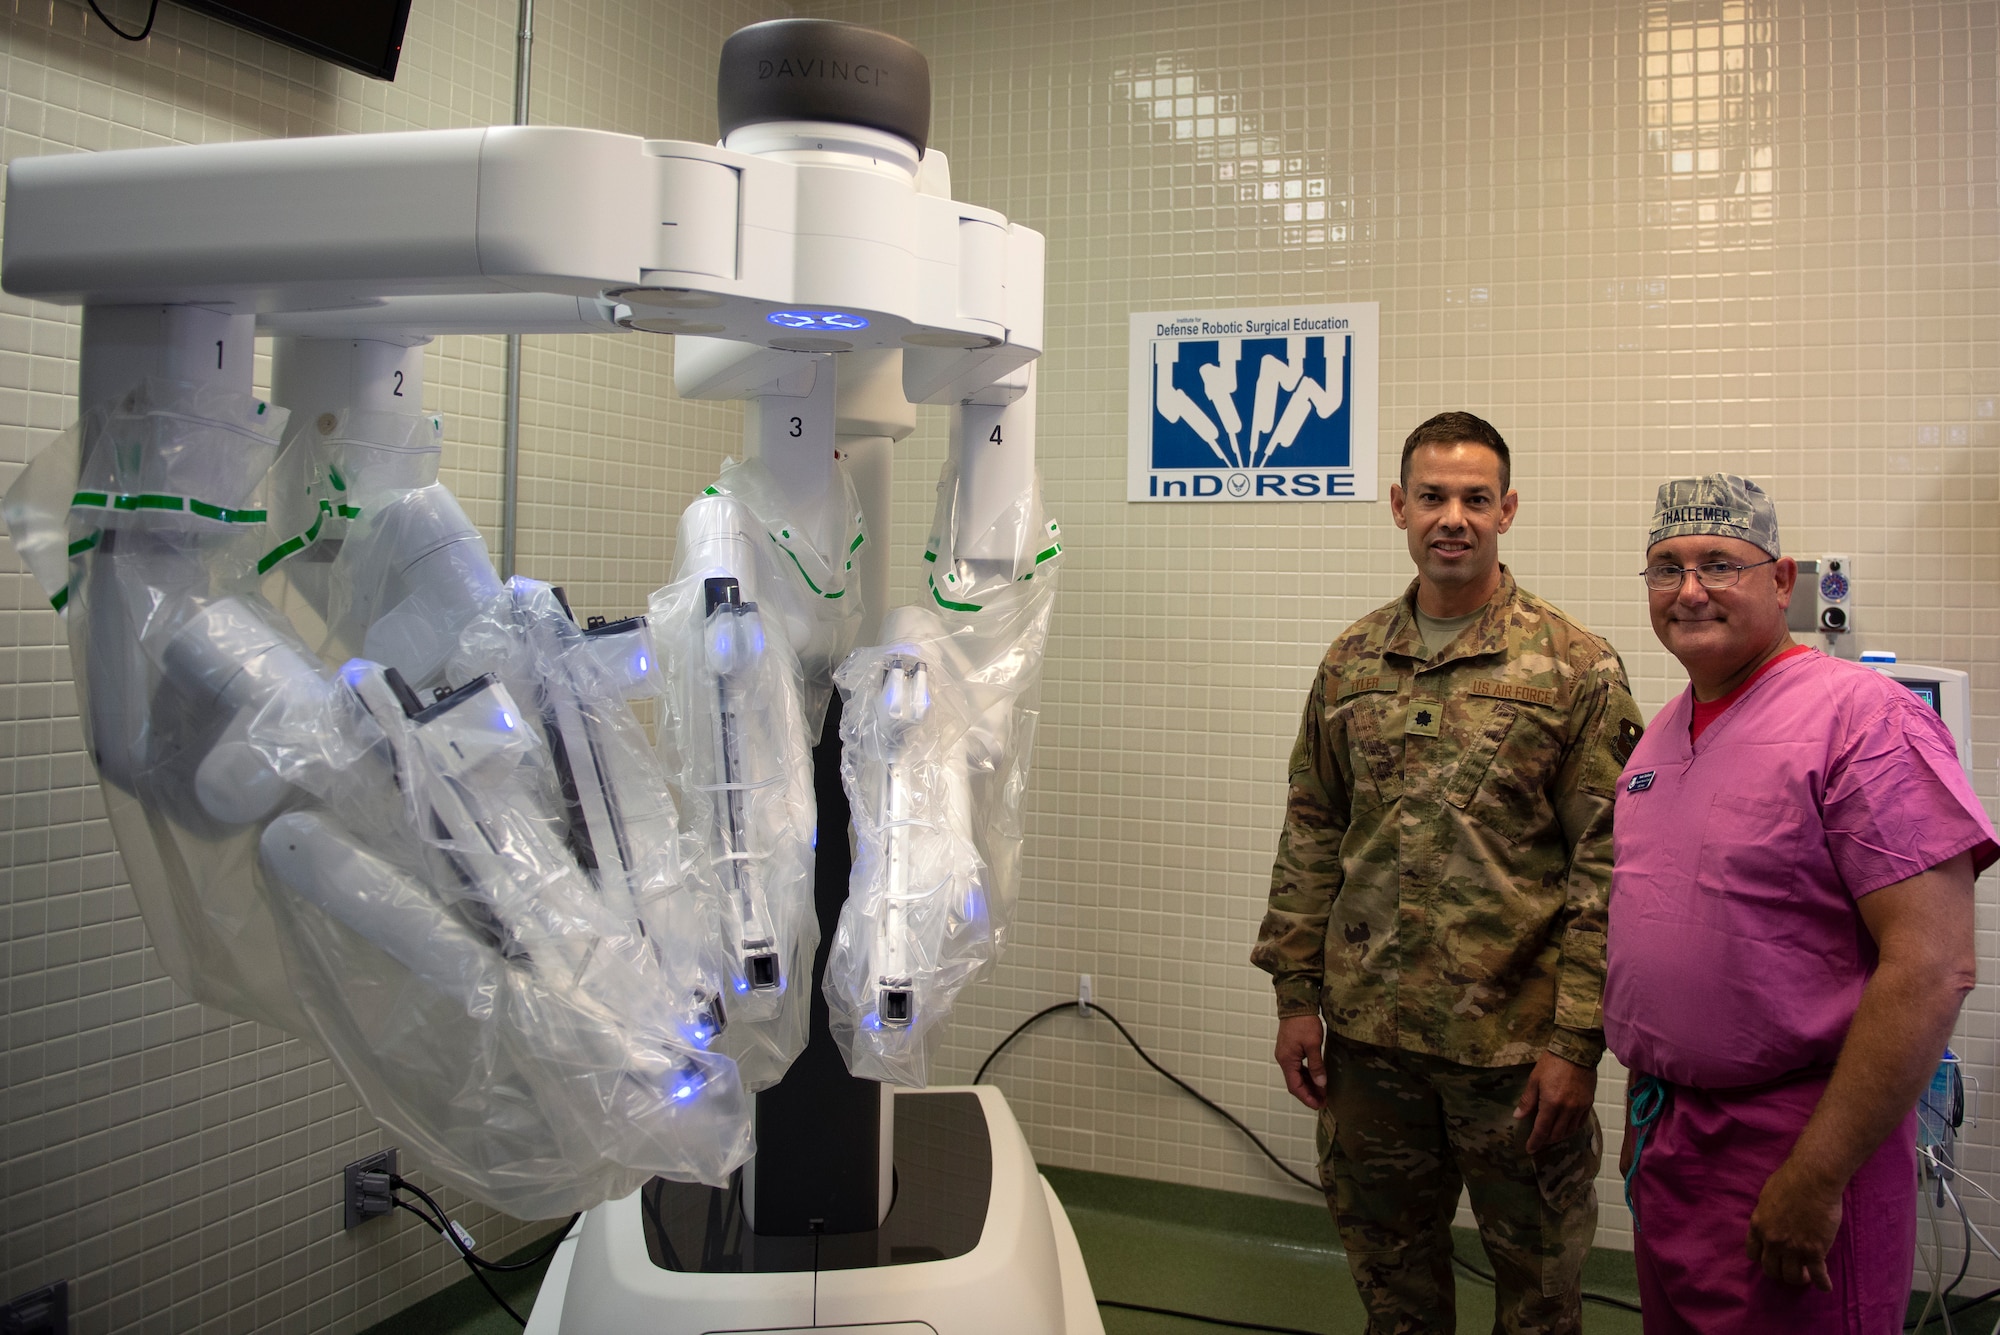 U.S. Air Force Lt. Col. Josh Tyler, 81st Surgical Operations Squadron Institute for Defense Robotic Surgery Education director, and Maj. Scott Thallemer, 81st MSGS InDORSE robot coordinator, pose for a photo in the Clinical Research Lab on Keesler Air Force Base, Mississippi, June 27, 2019. InDORSE is a program created by Tyler and Thallemer to provide surgeons with training on the DaVinci Xi surgical robot. Keesler AFB was the first hospital to have the DaVinci Xi in the Air Force. (U.S. Air Force photo by Airman 1st Class Kimberly L. Mueller)